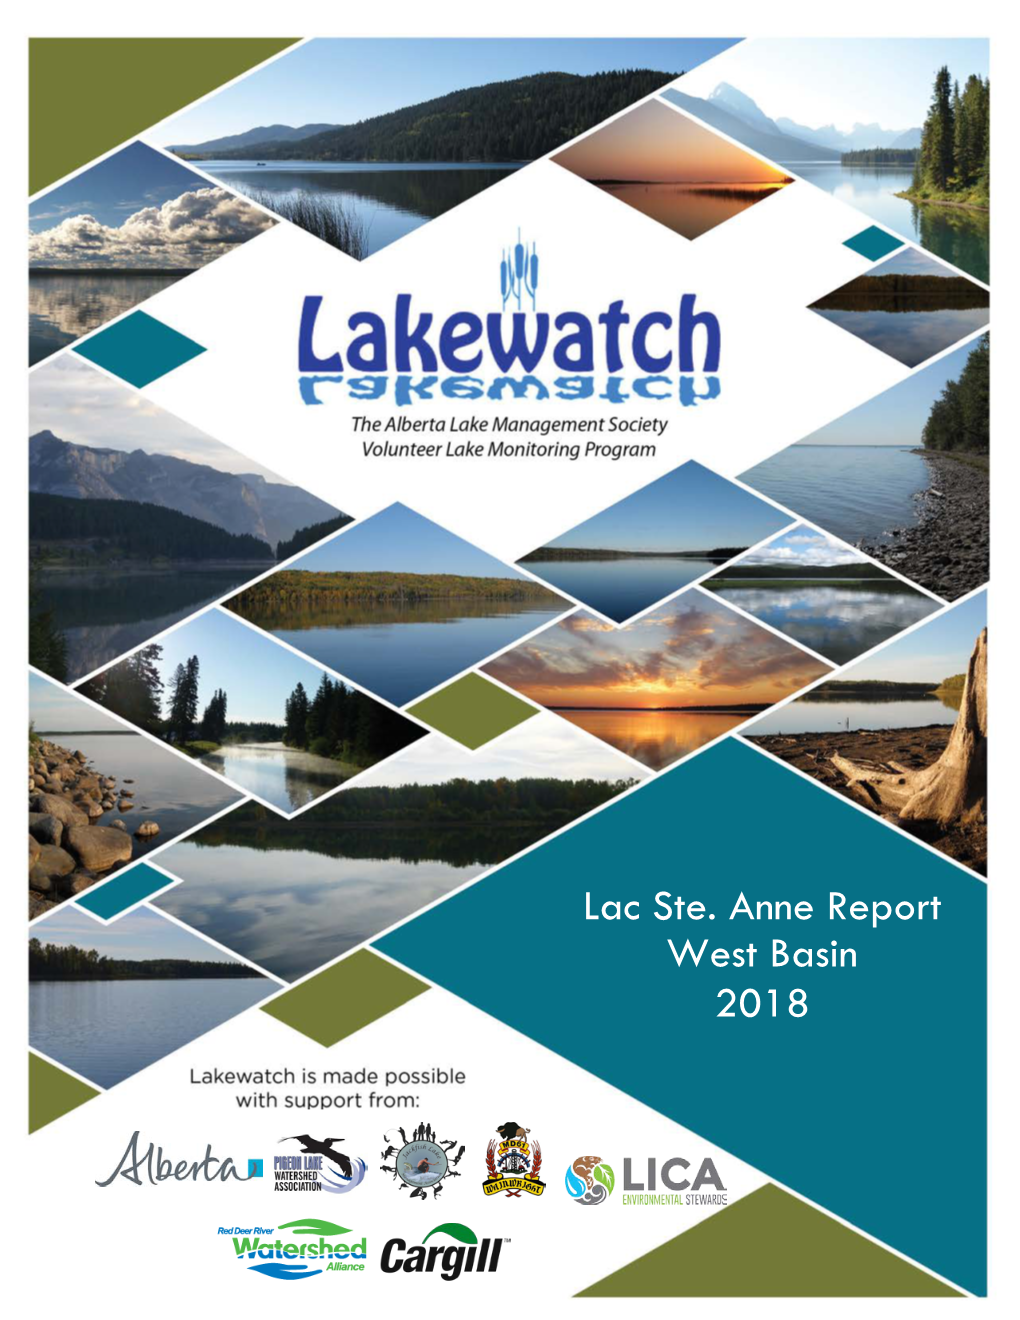 Lac Ste. Anne Report West Basin 2018